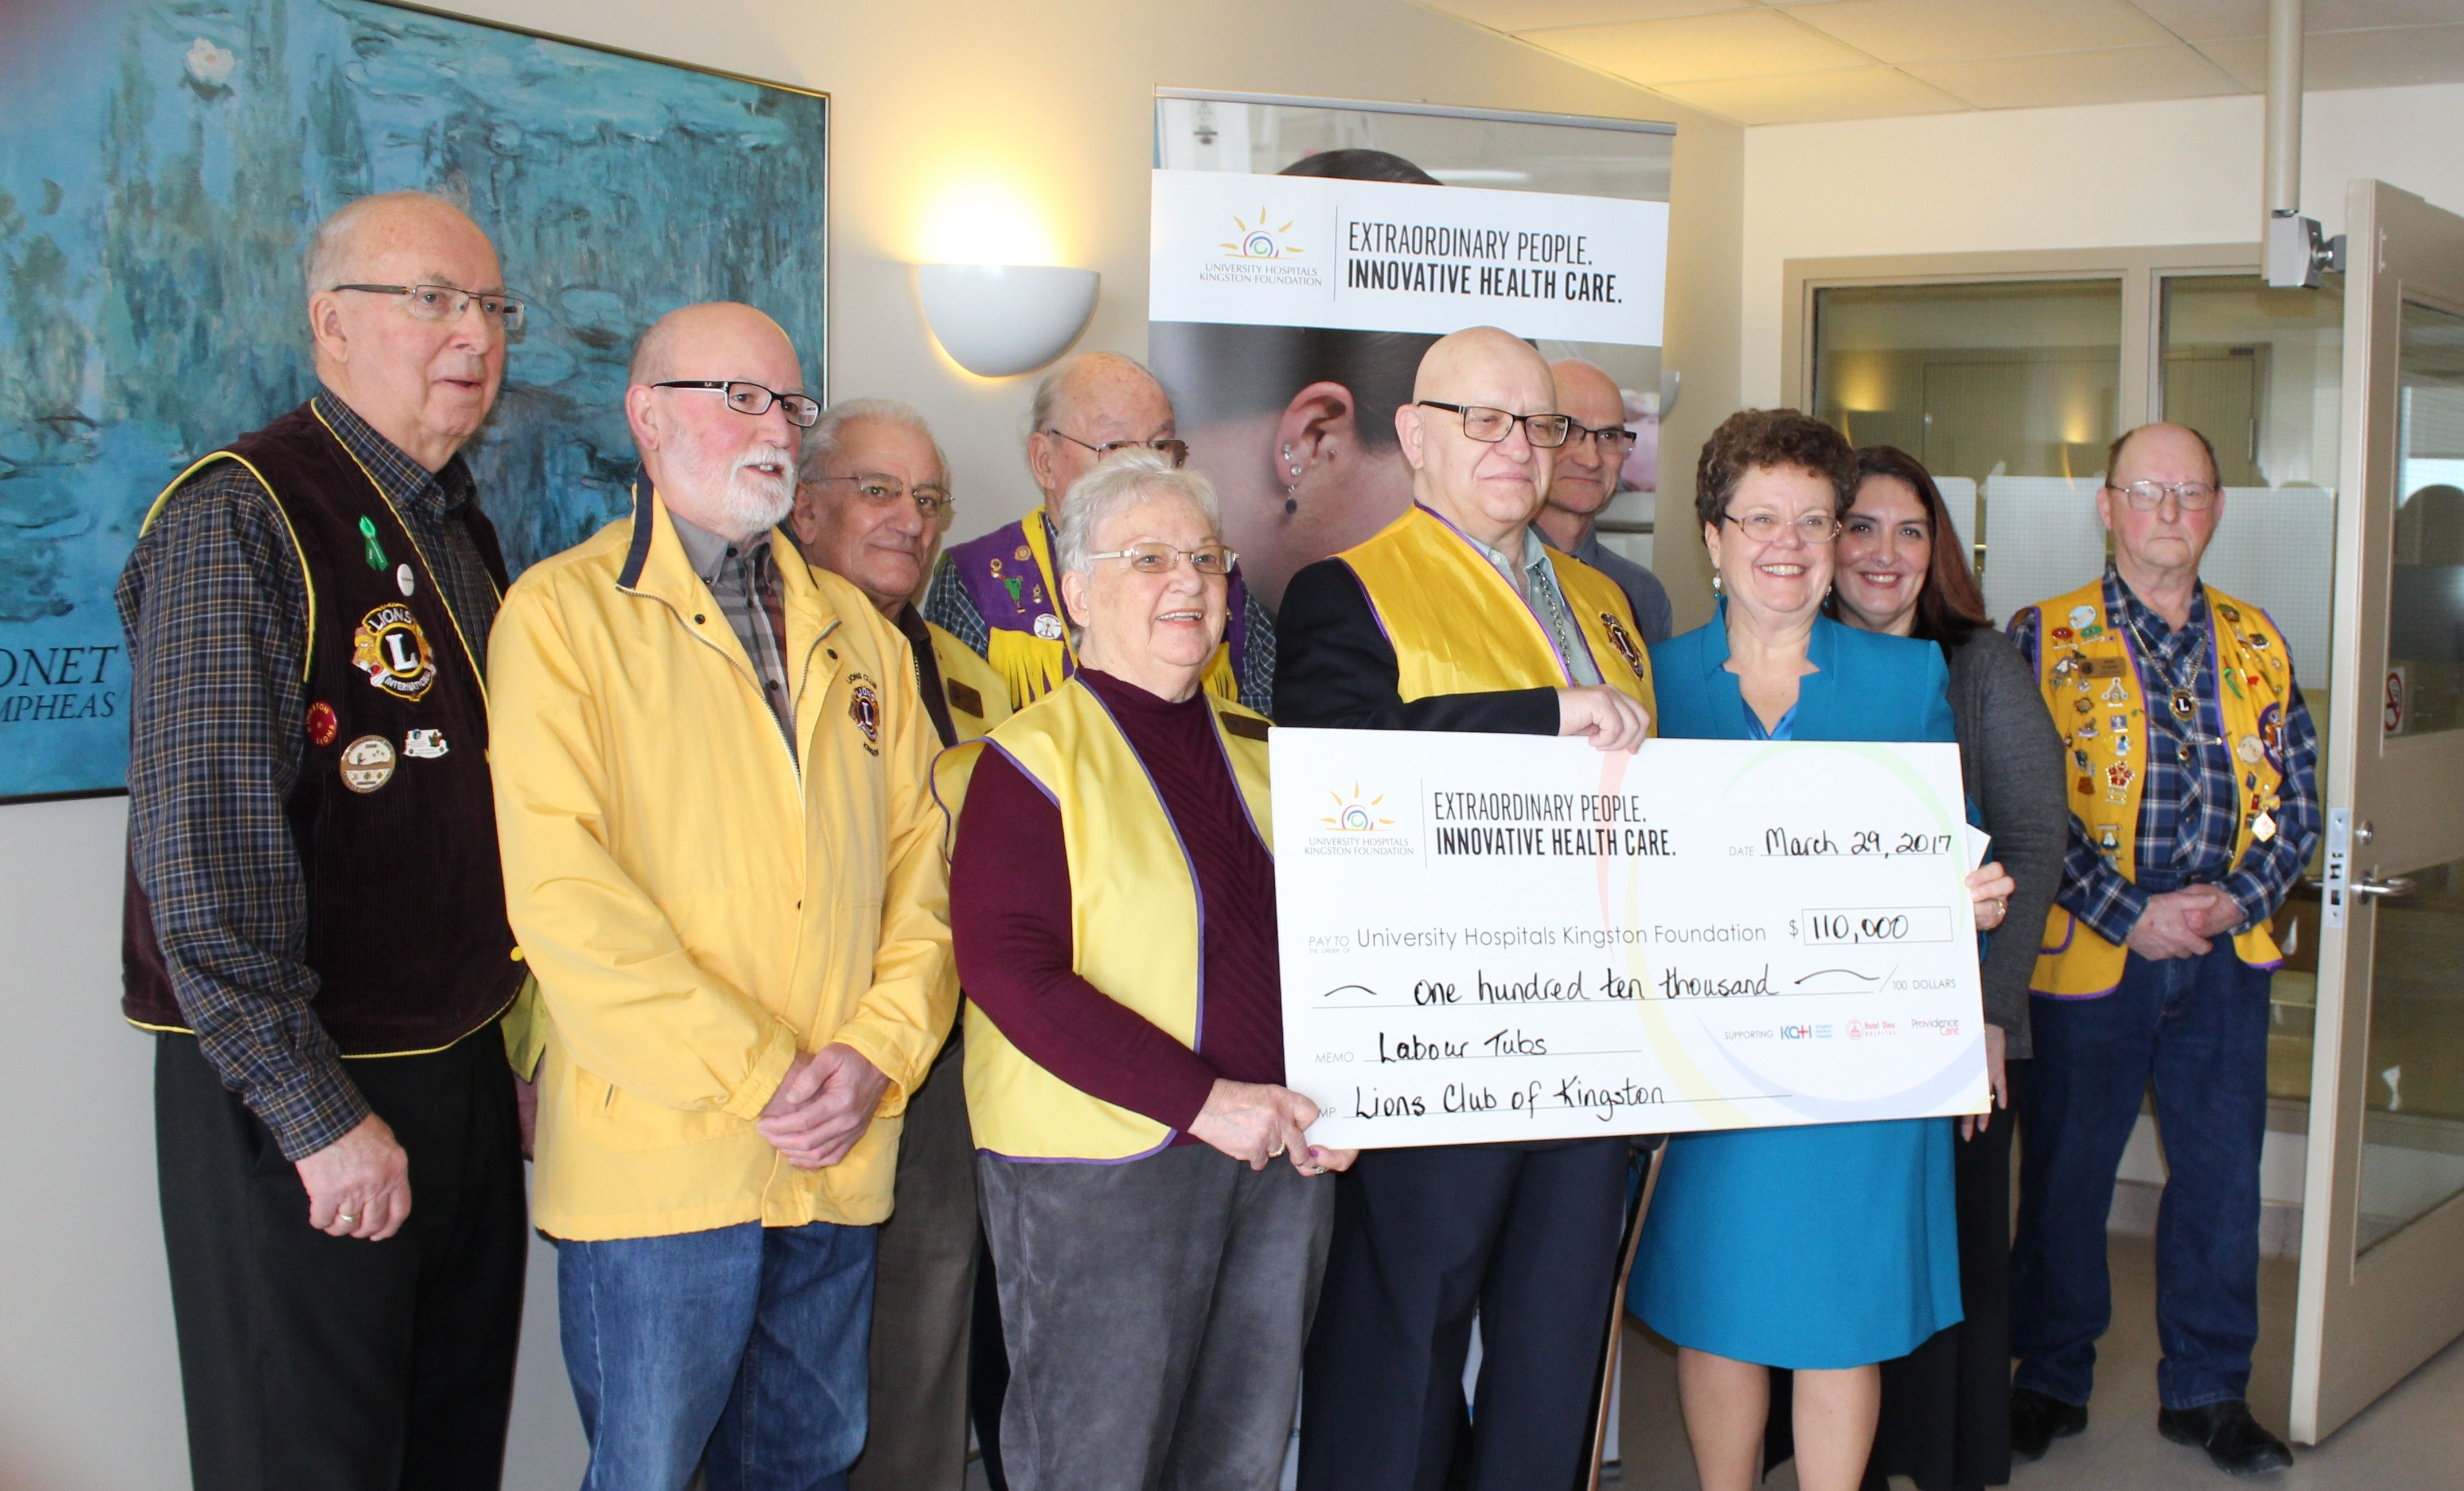 Members of the Lions Club present UHKF President & CEO Denise Cumming with their $110,000 donation to KHSC